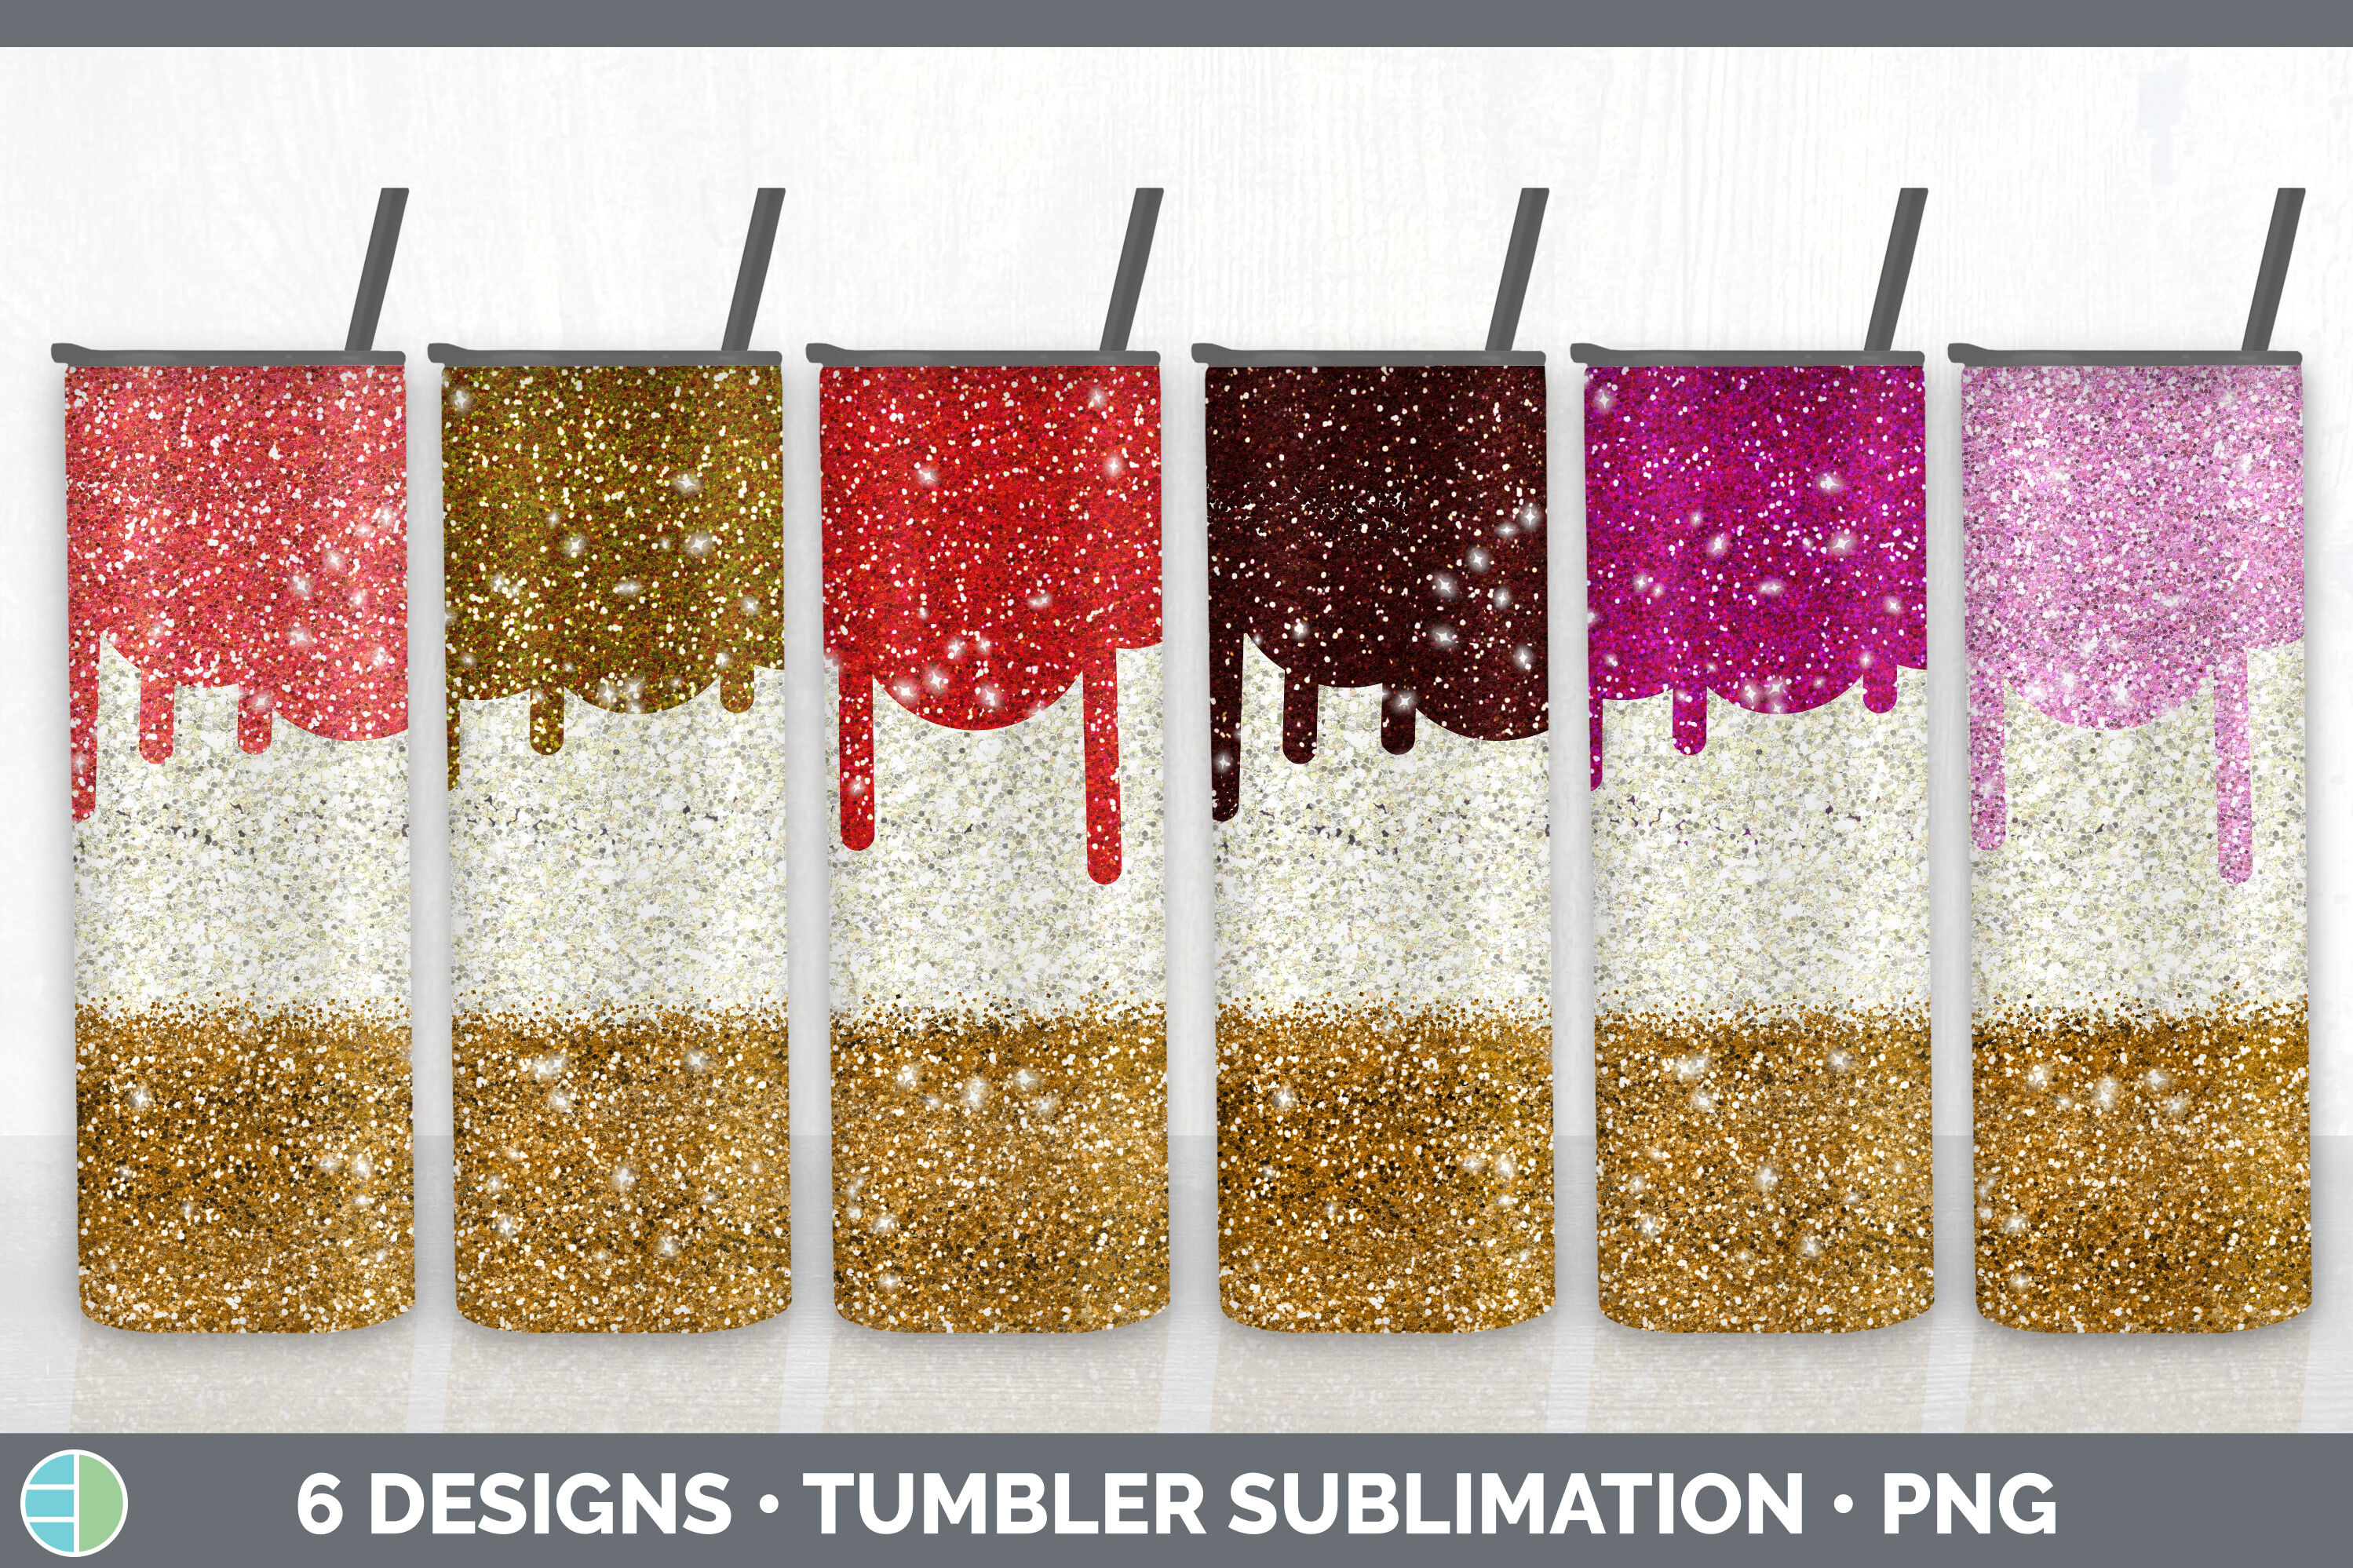 Skinny Tumbler Sublimation Red Glitter Graphic by Enliven Designs